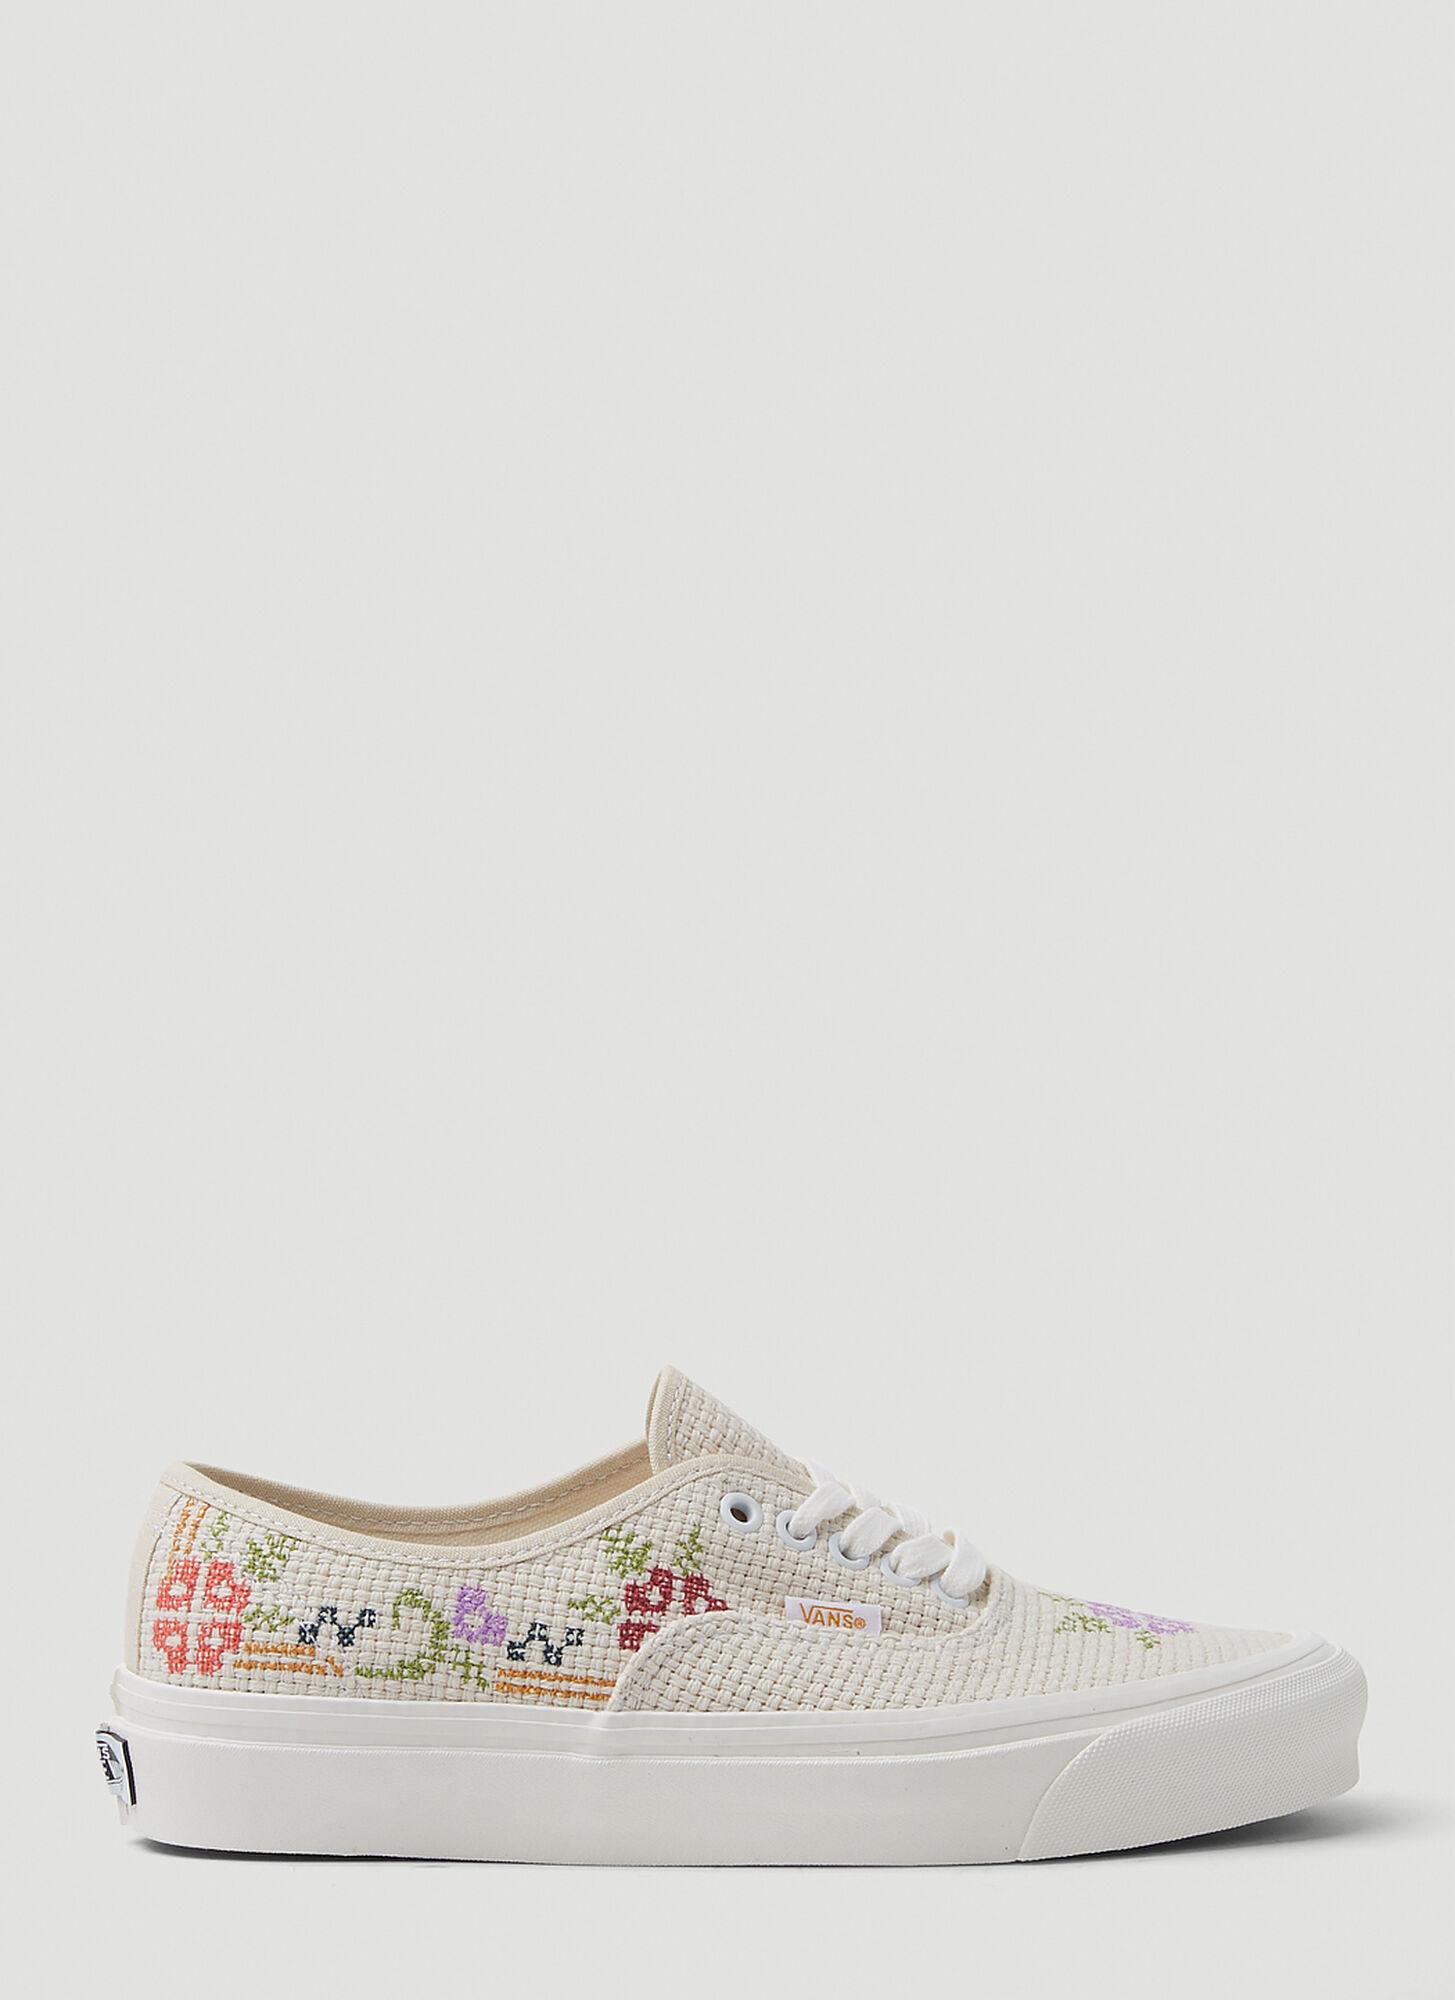 Vans Ua Authentic 44 Dx Granny Stitch Sneakers in White | Lyst